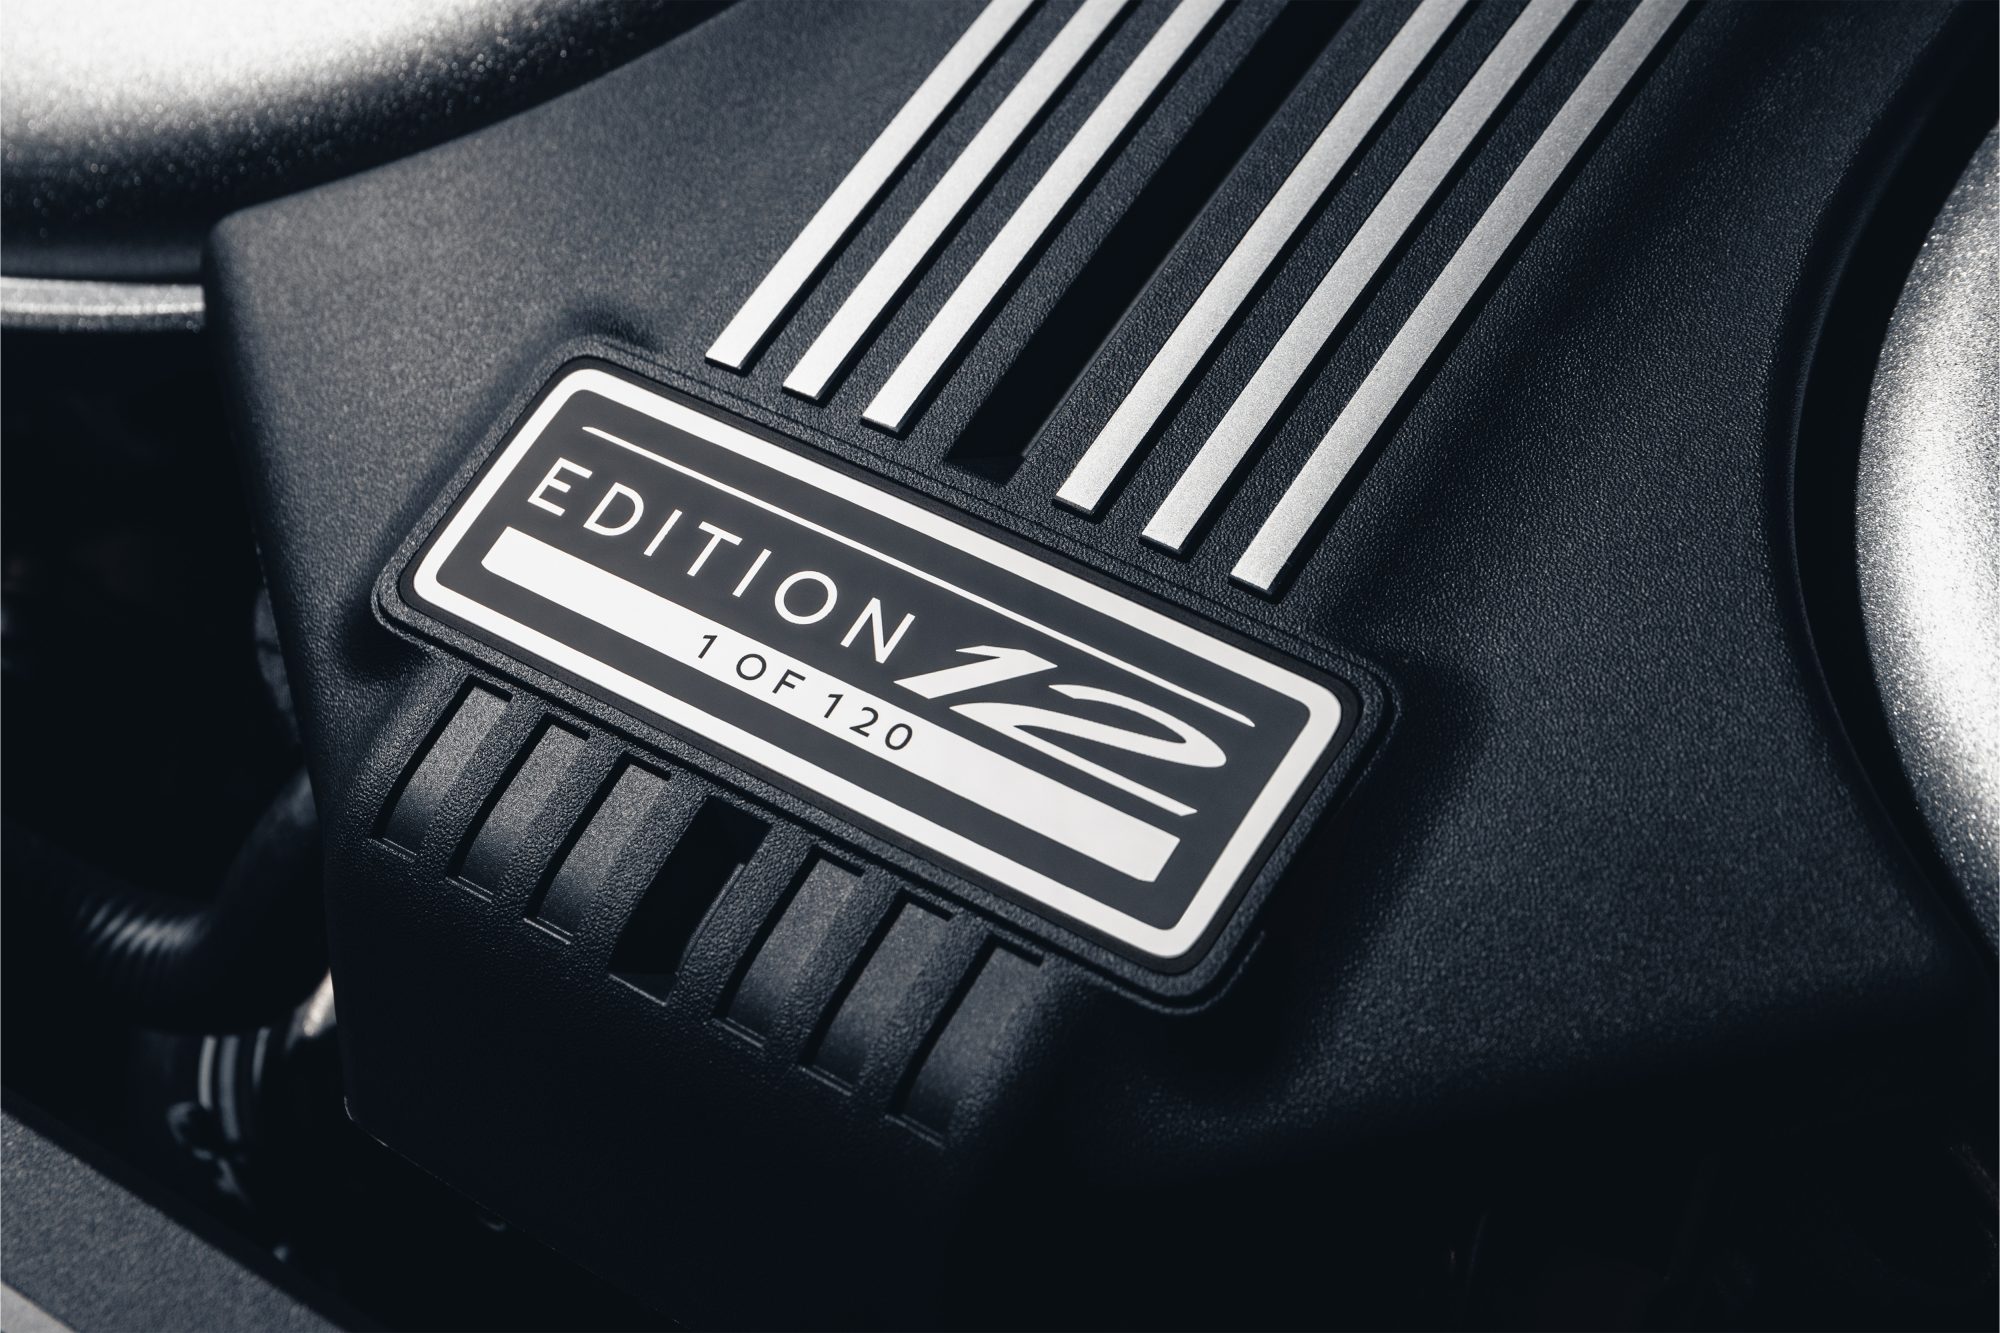 Bentley Speed Edition 12: Tribute to an engineering icon